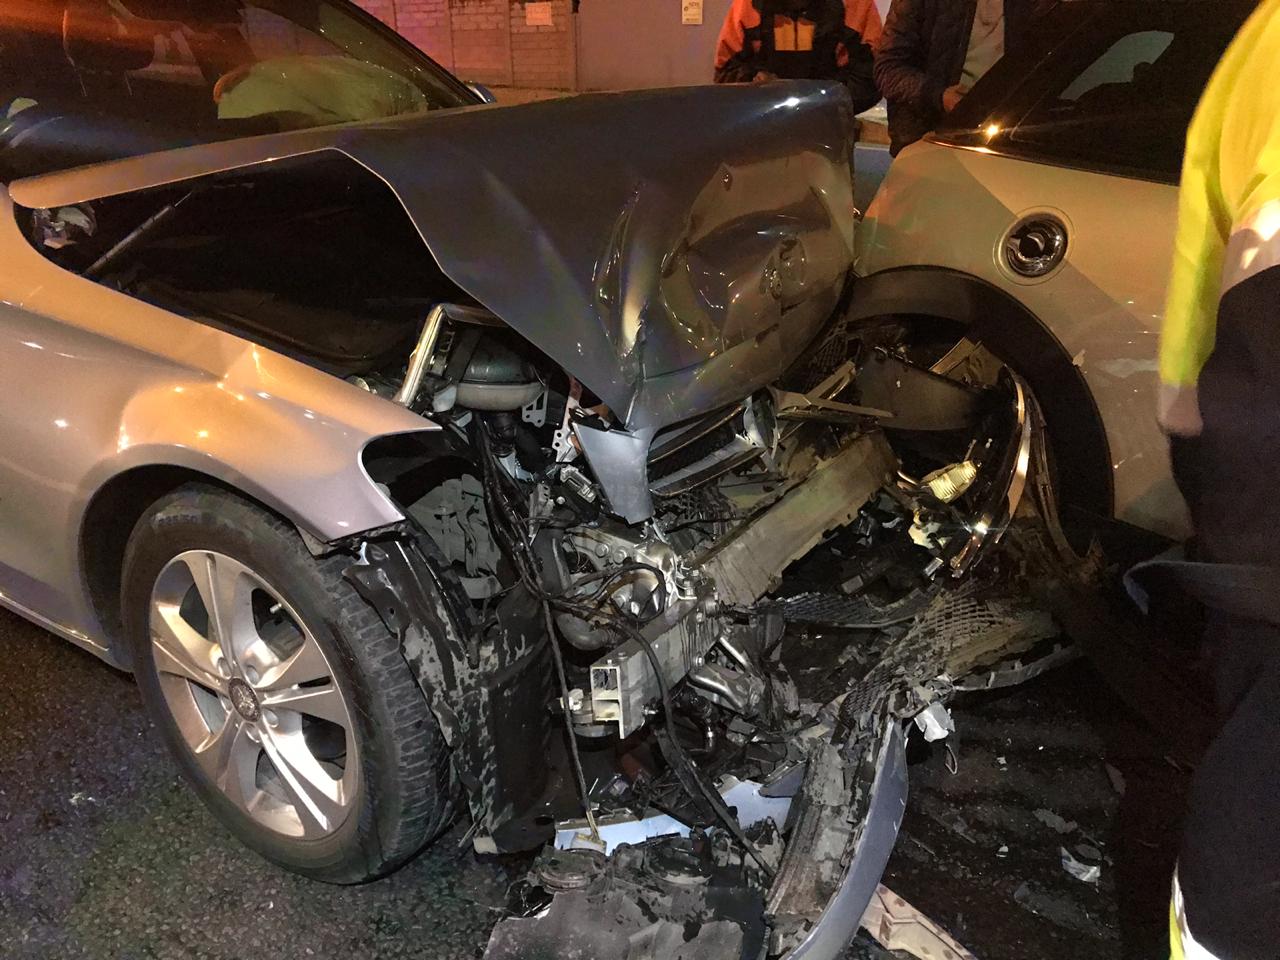 Fortunate escape from injury in collision in Fourways